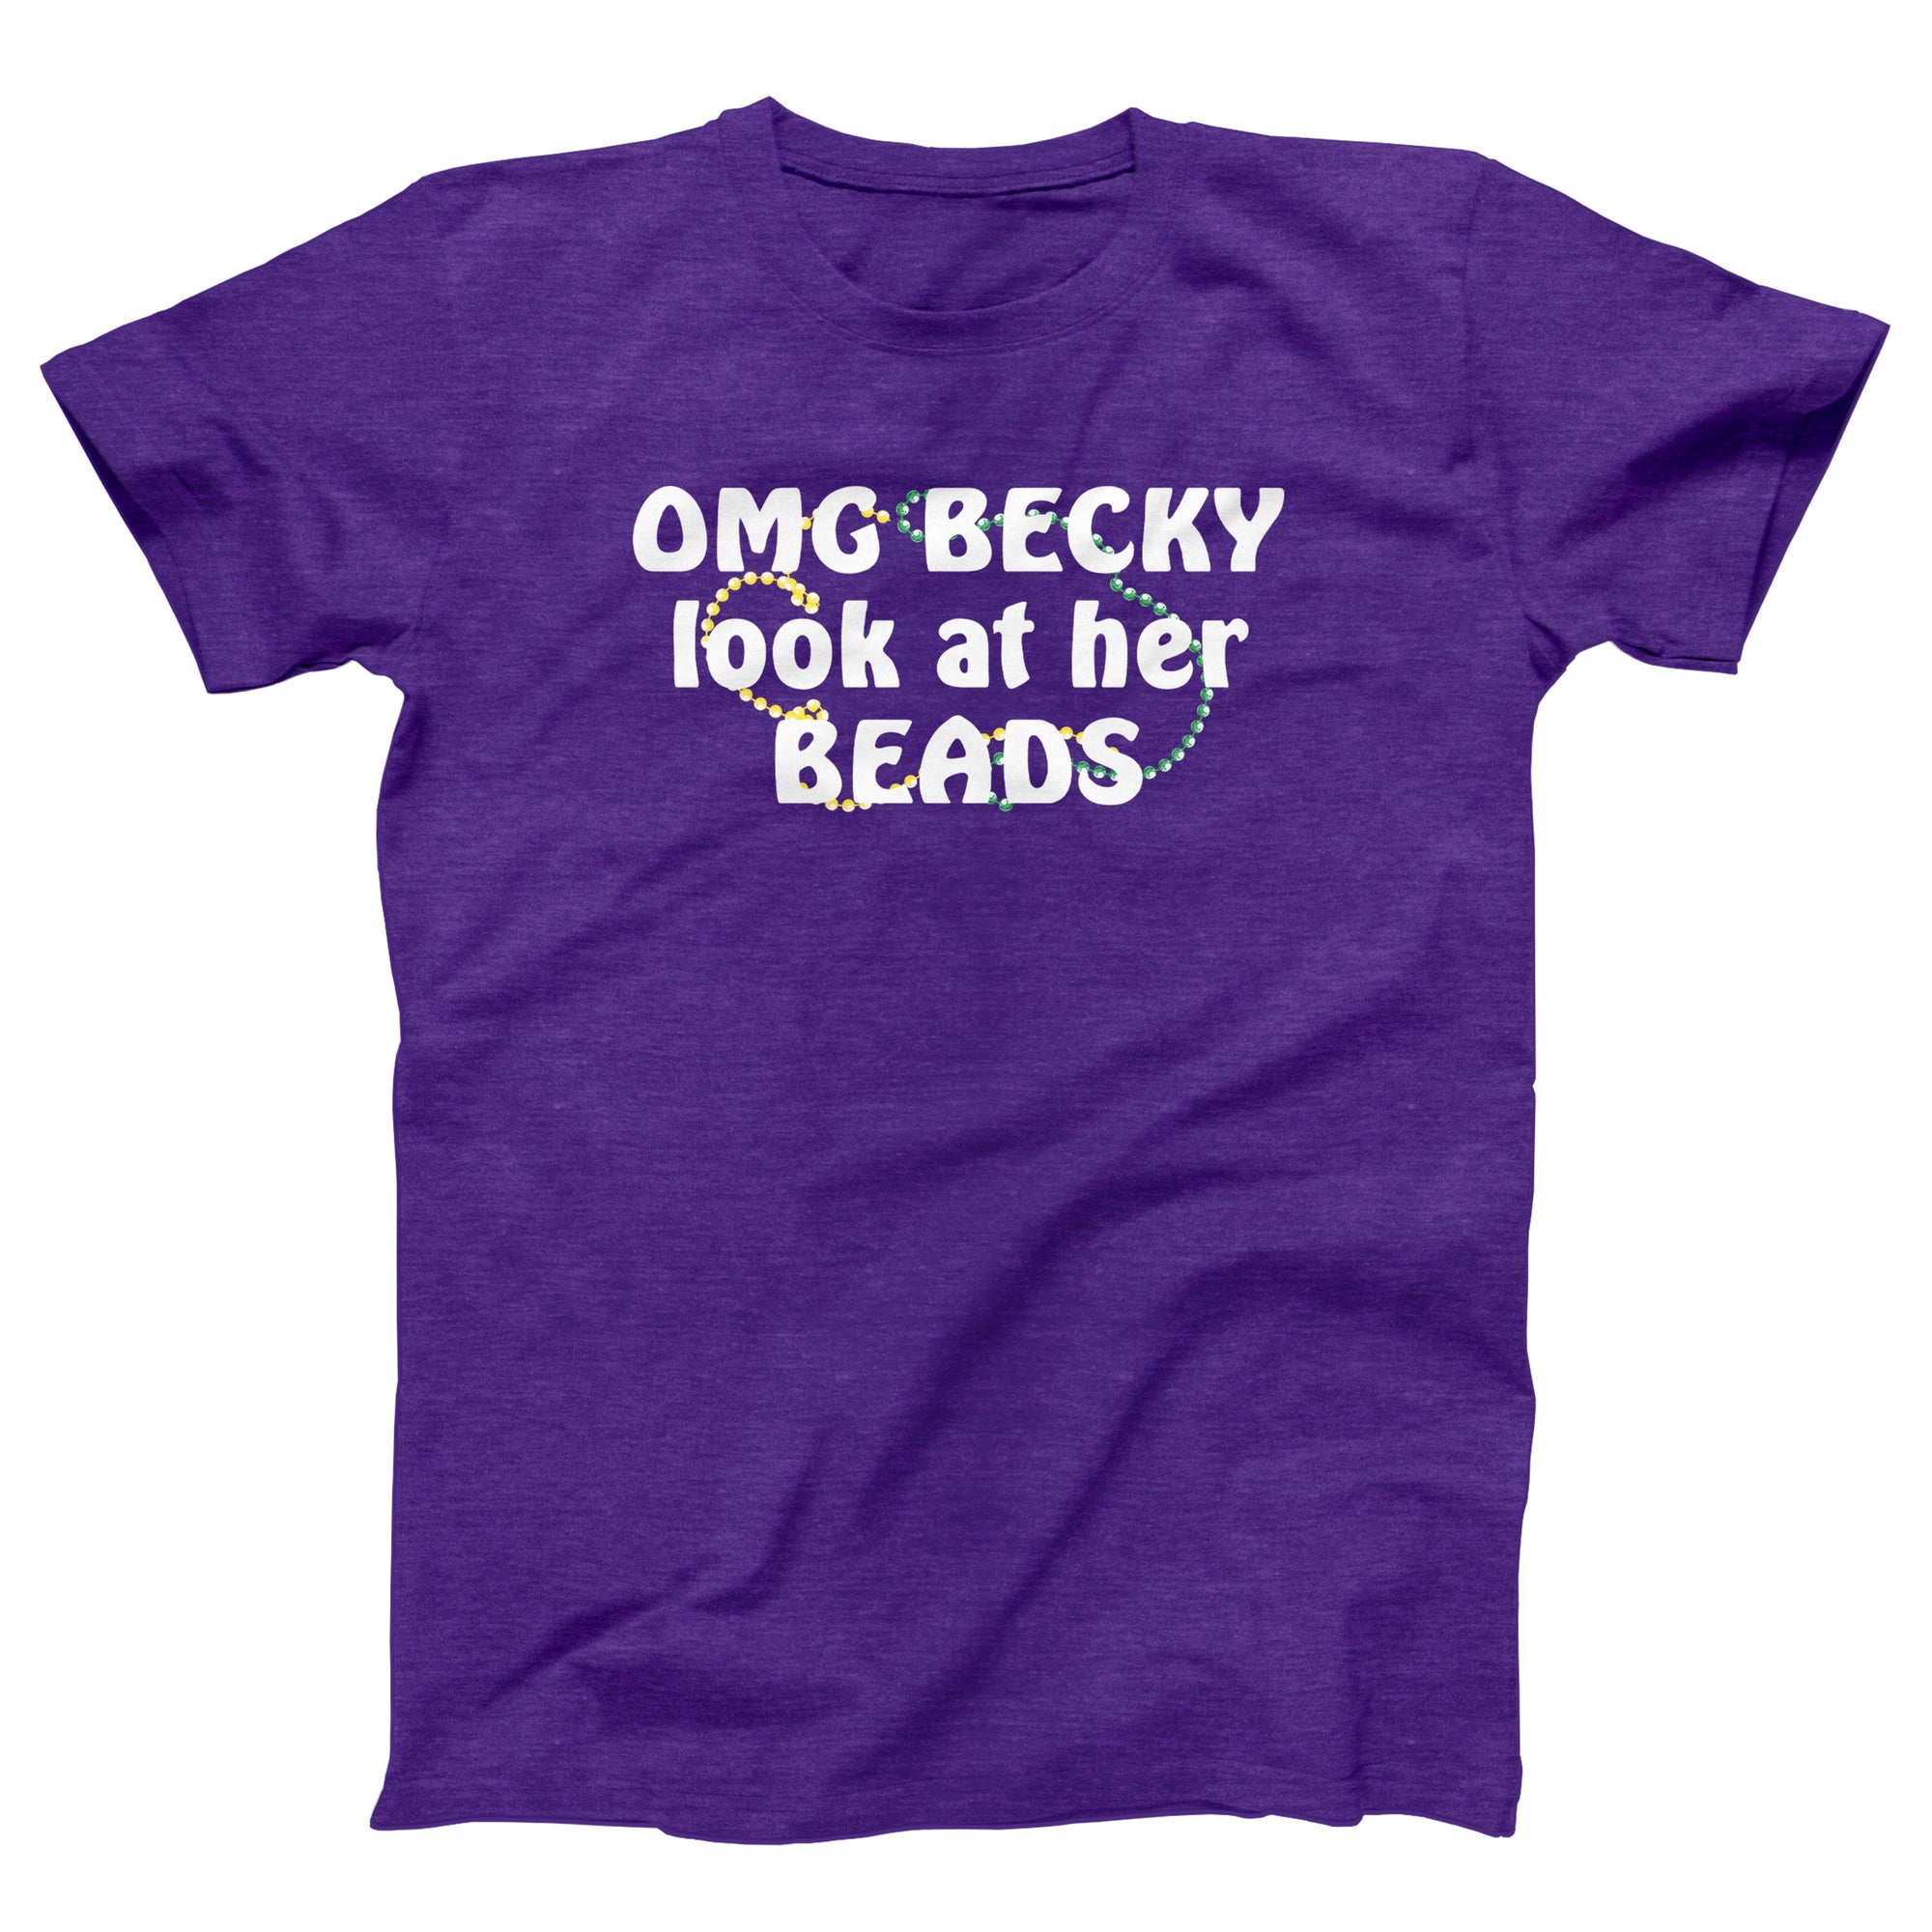 OMG Becky Look At Her Beads Adult Unisex T-Shirt - anishphilip